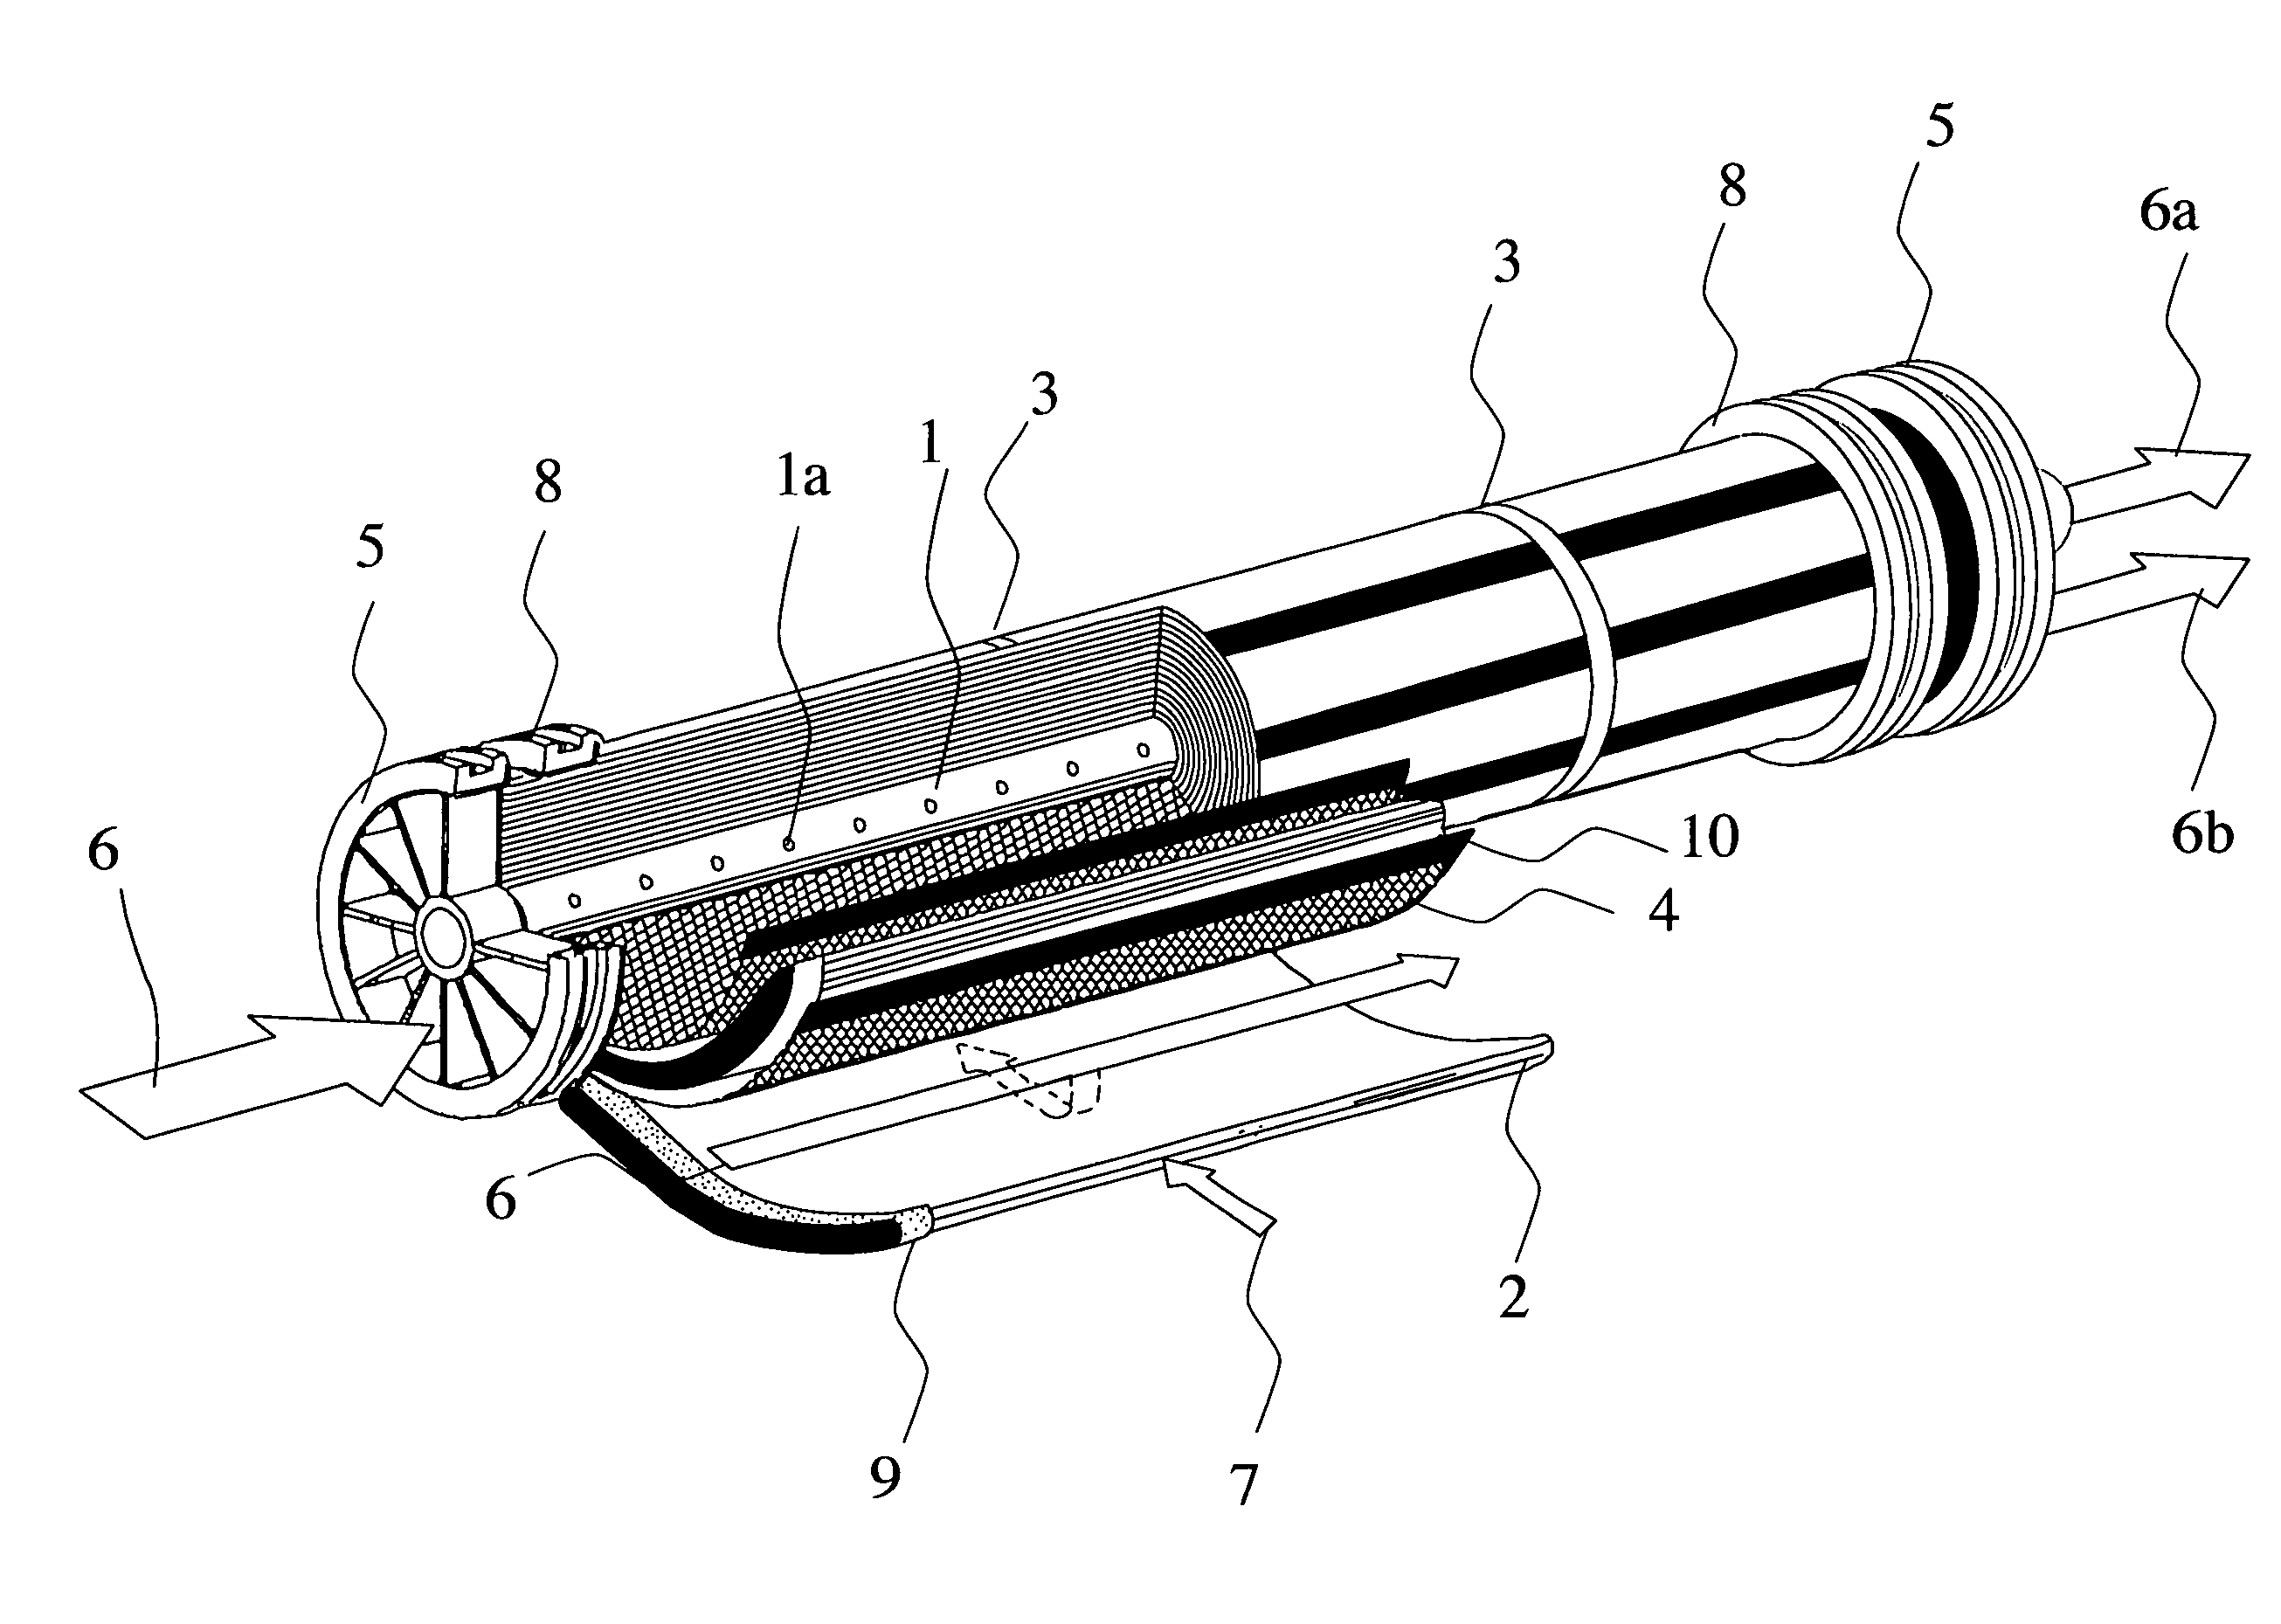 Spiral-wound liquid membrane module for separation of fluids and gases